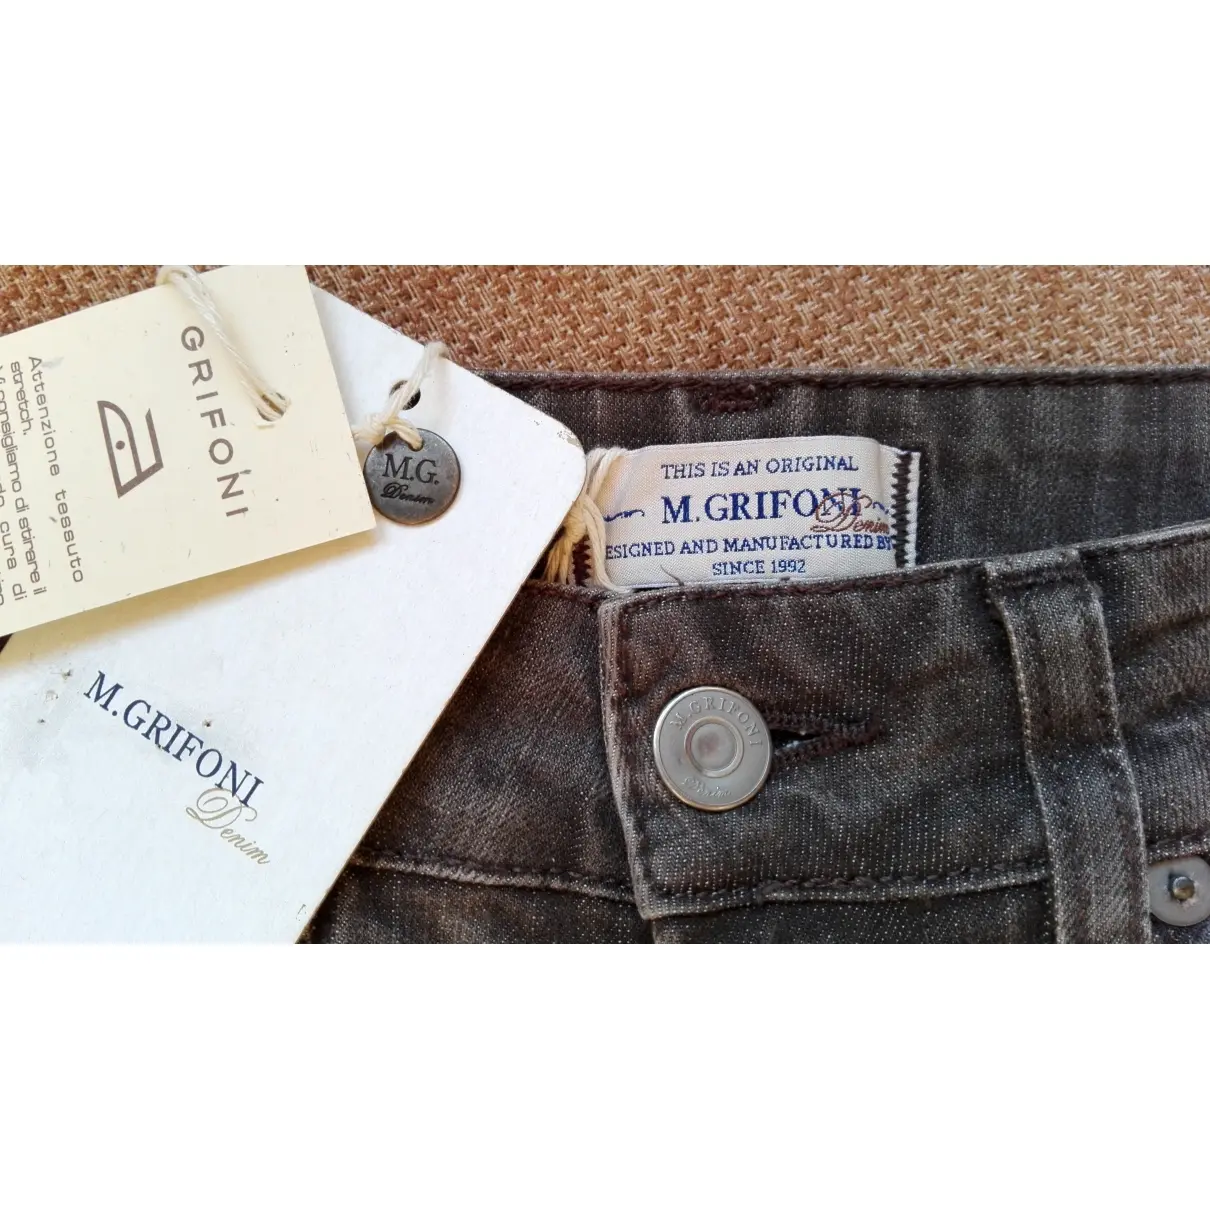 Bootcut jeans Mauro Grifoni